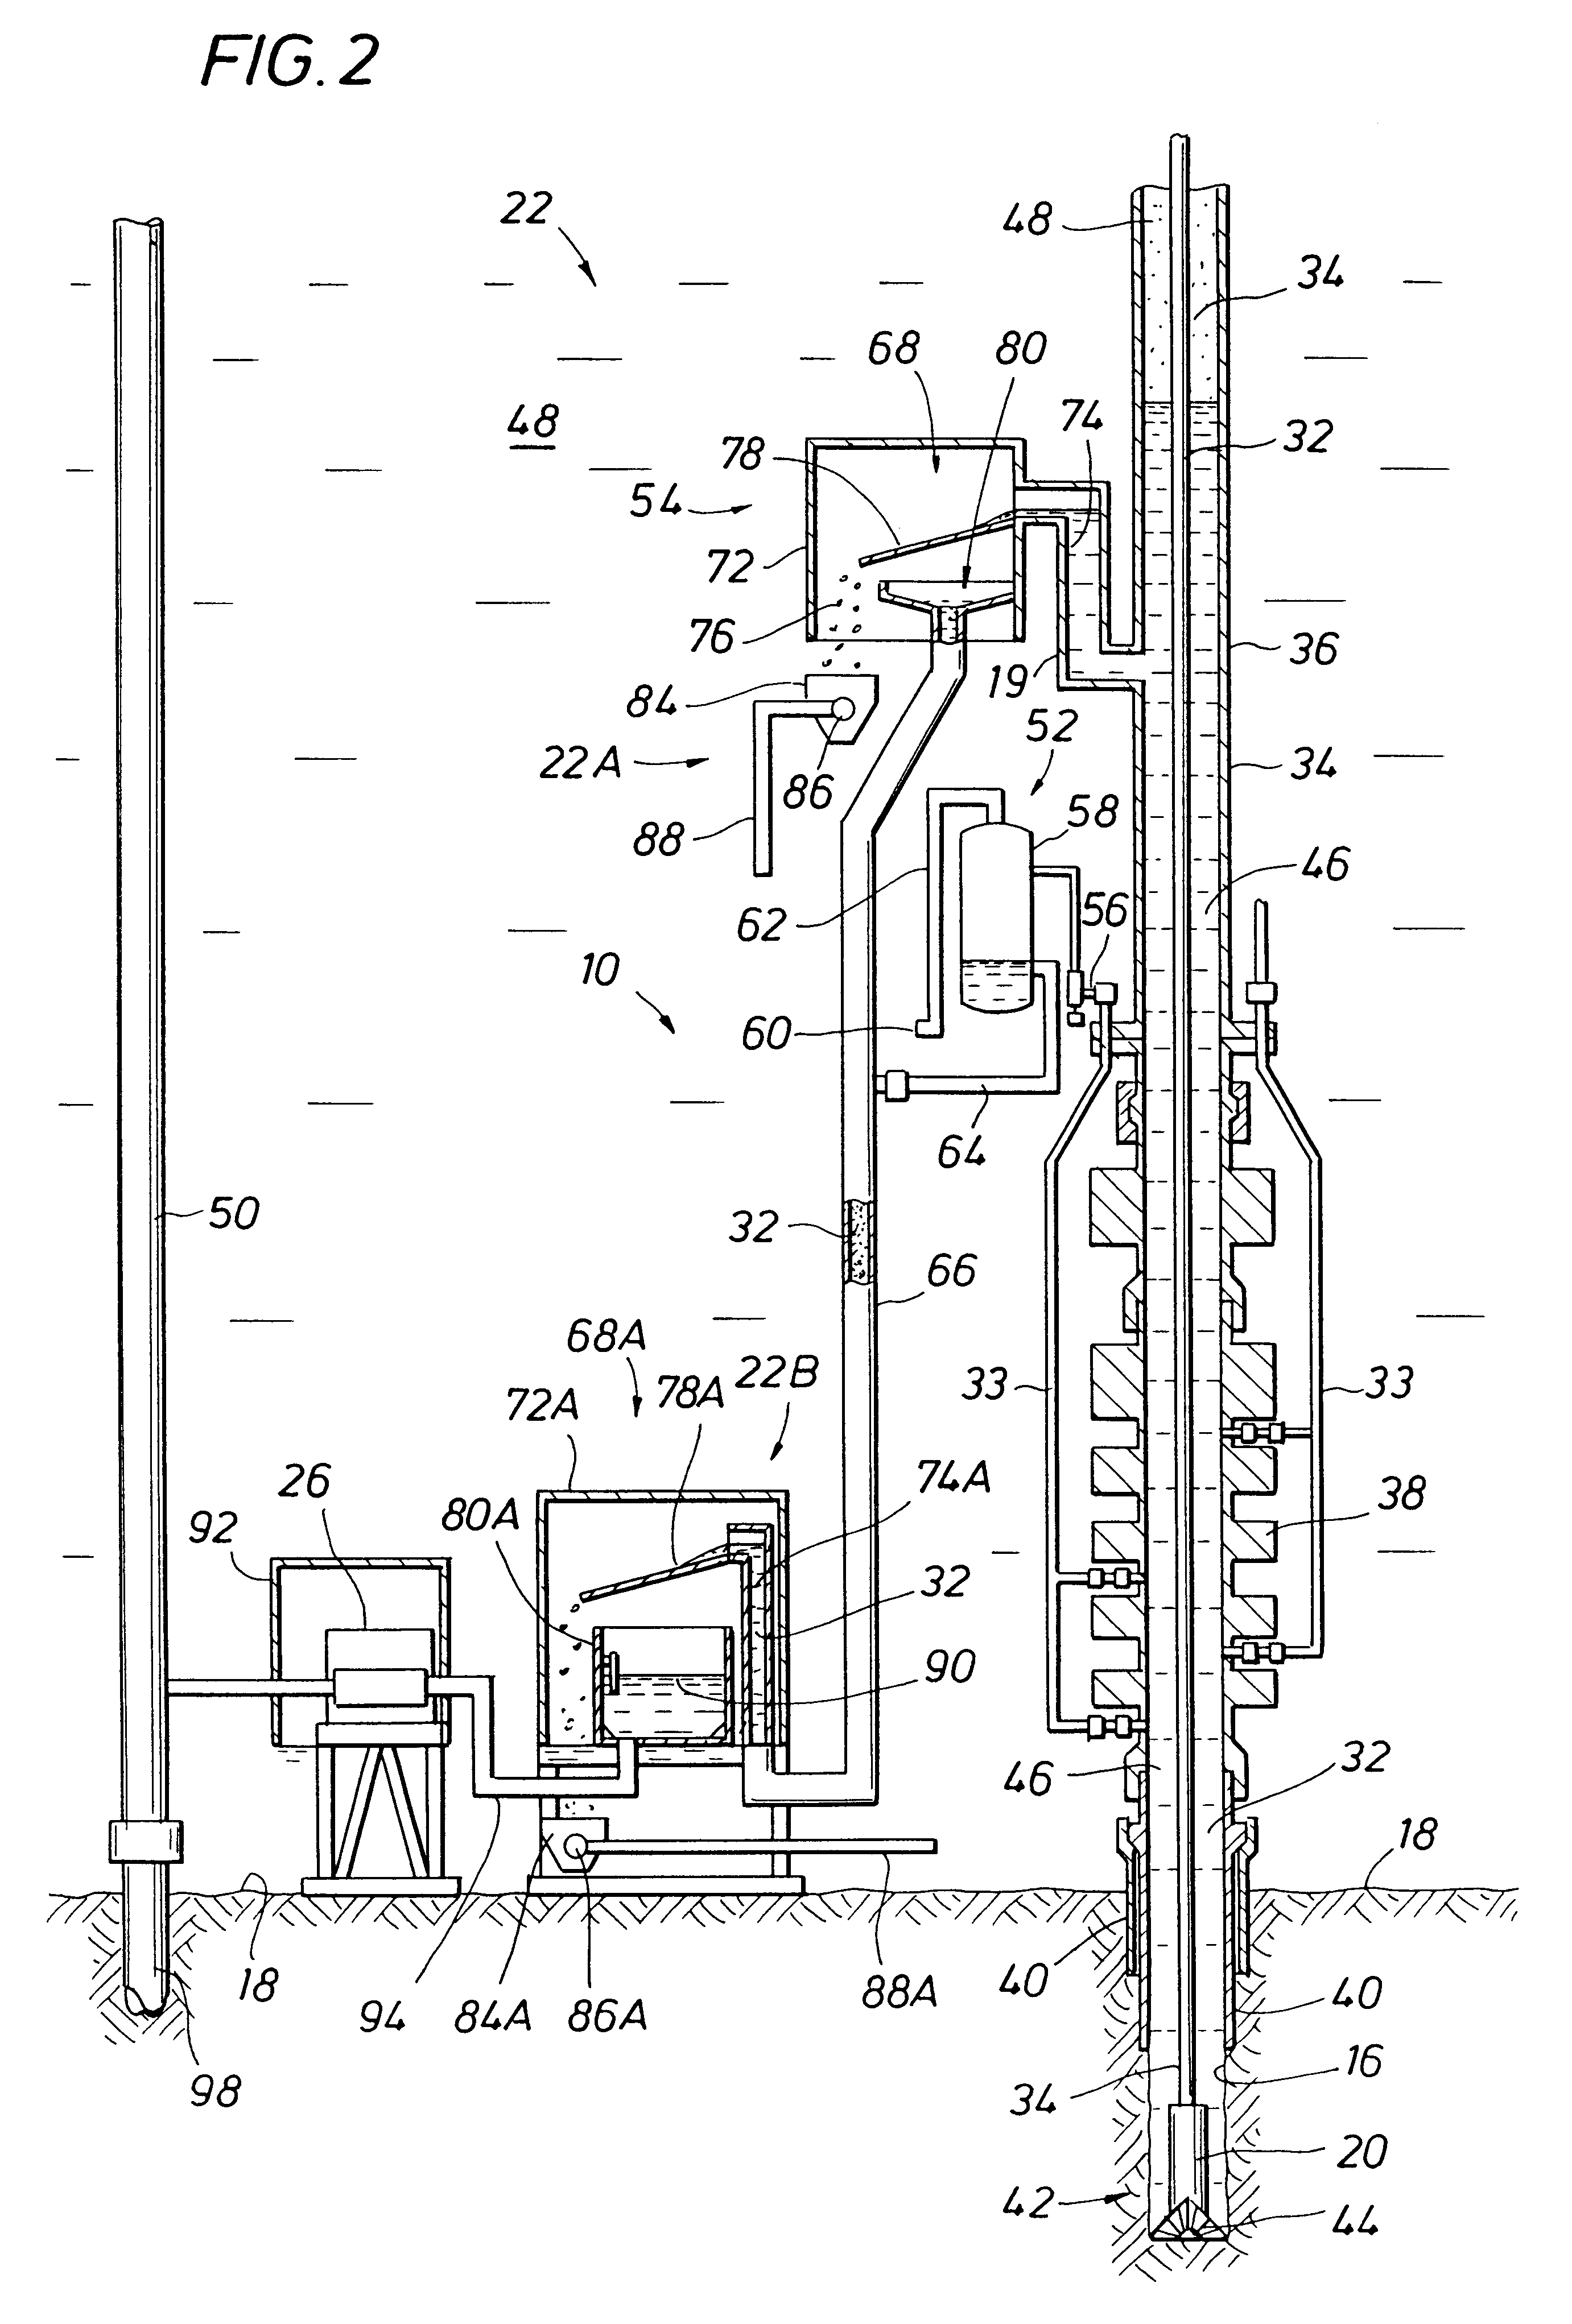 Deepwater drill string shut-off valve system and method for controlling mud circulation